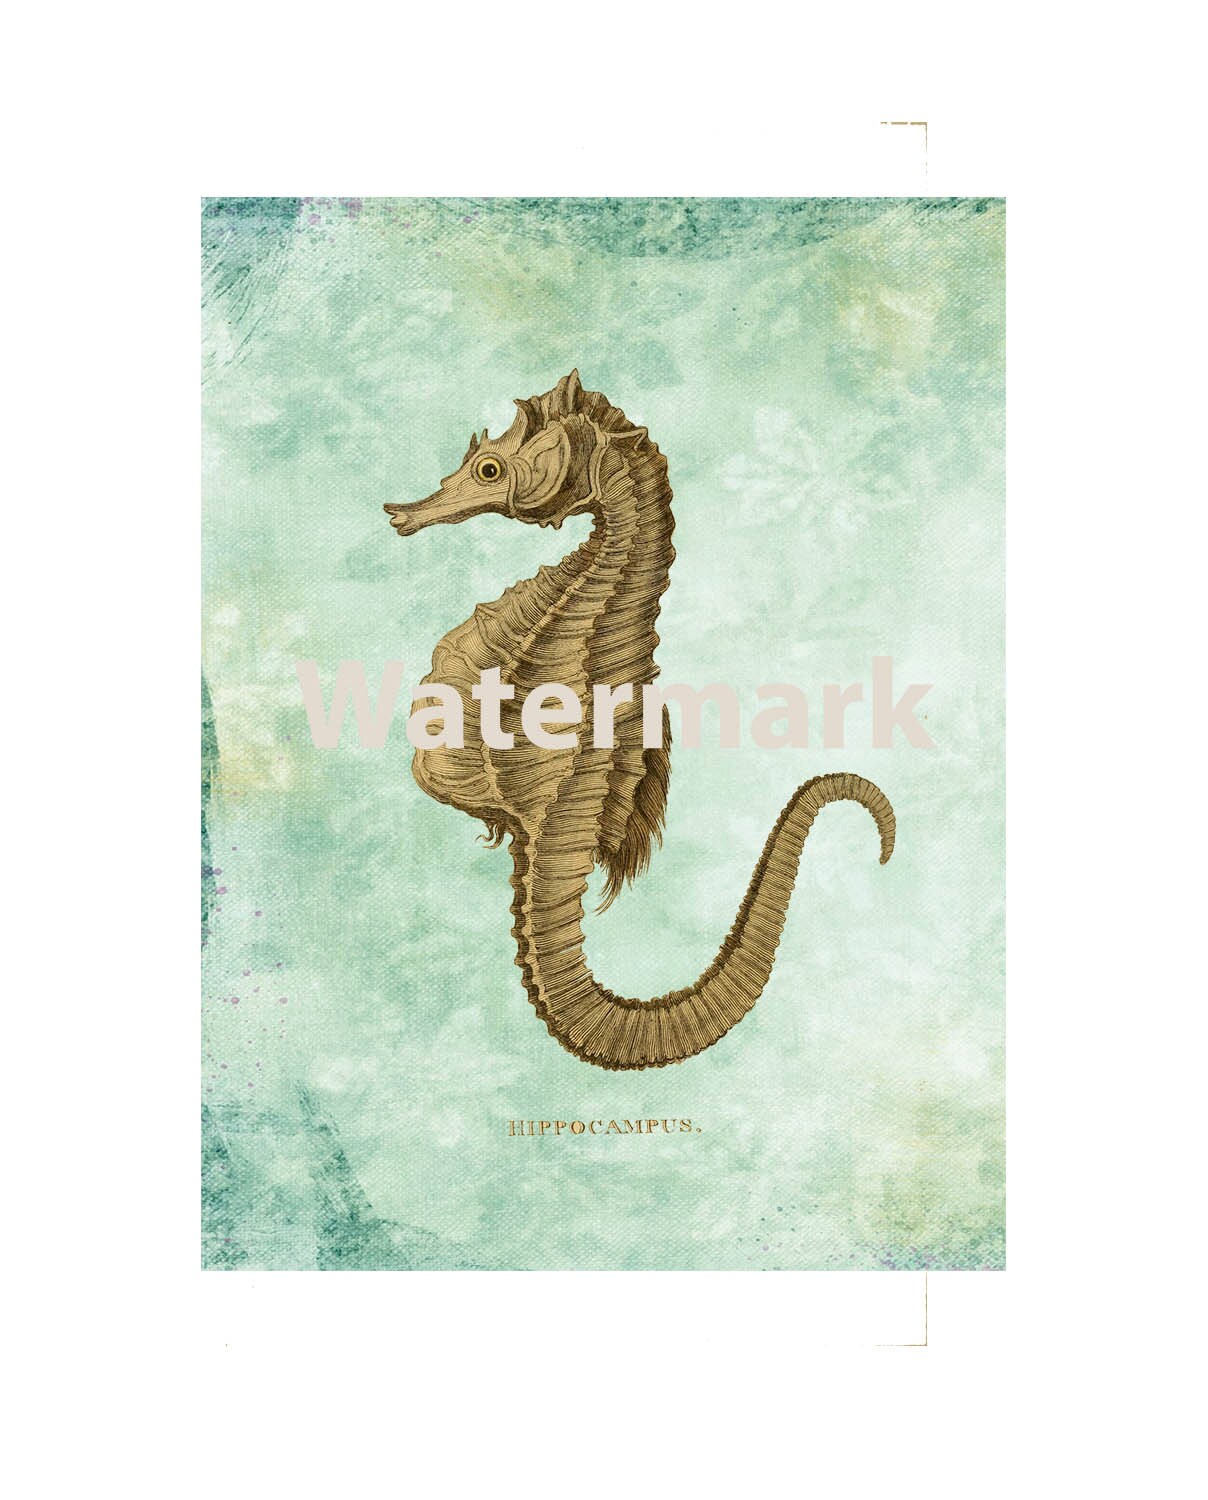 Instant Download Seahorse Digital Print For 8 1/2" x 11" Paper Sized To 8" x 10" Nautical Ocean Art